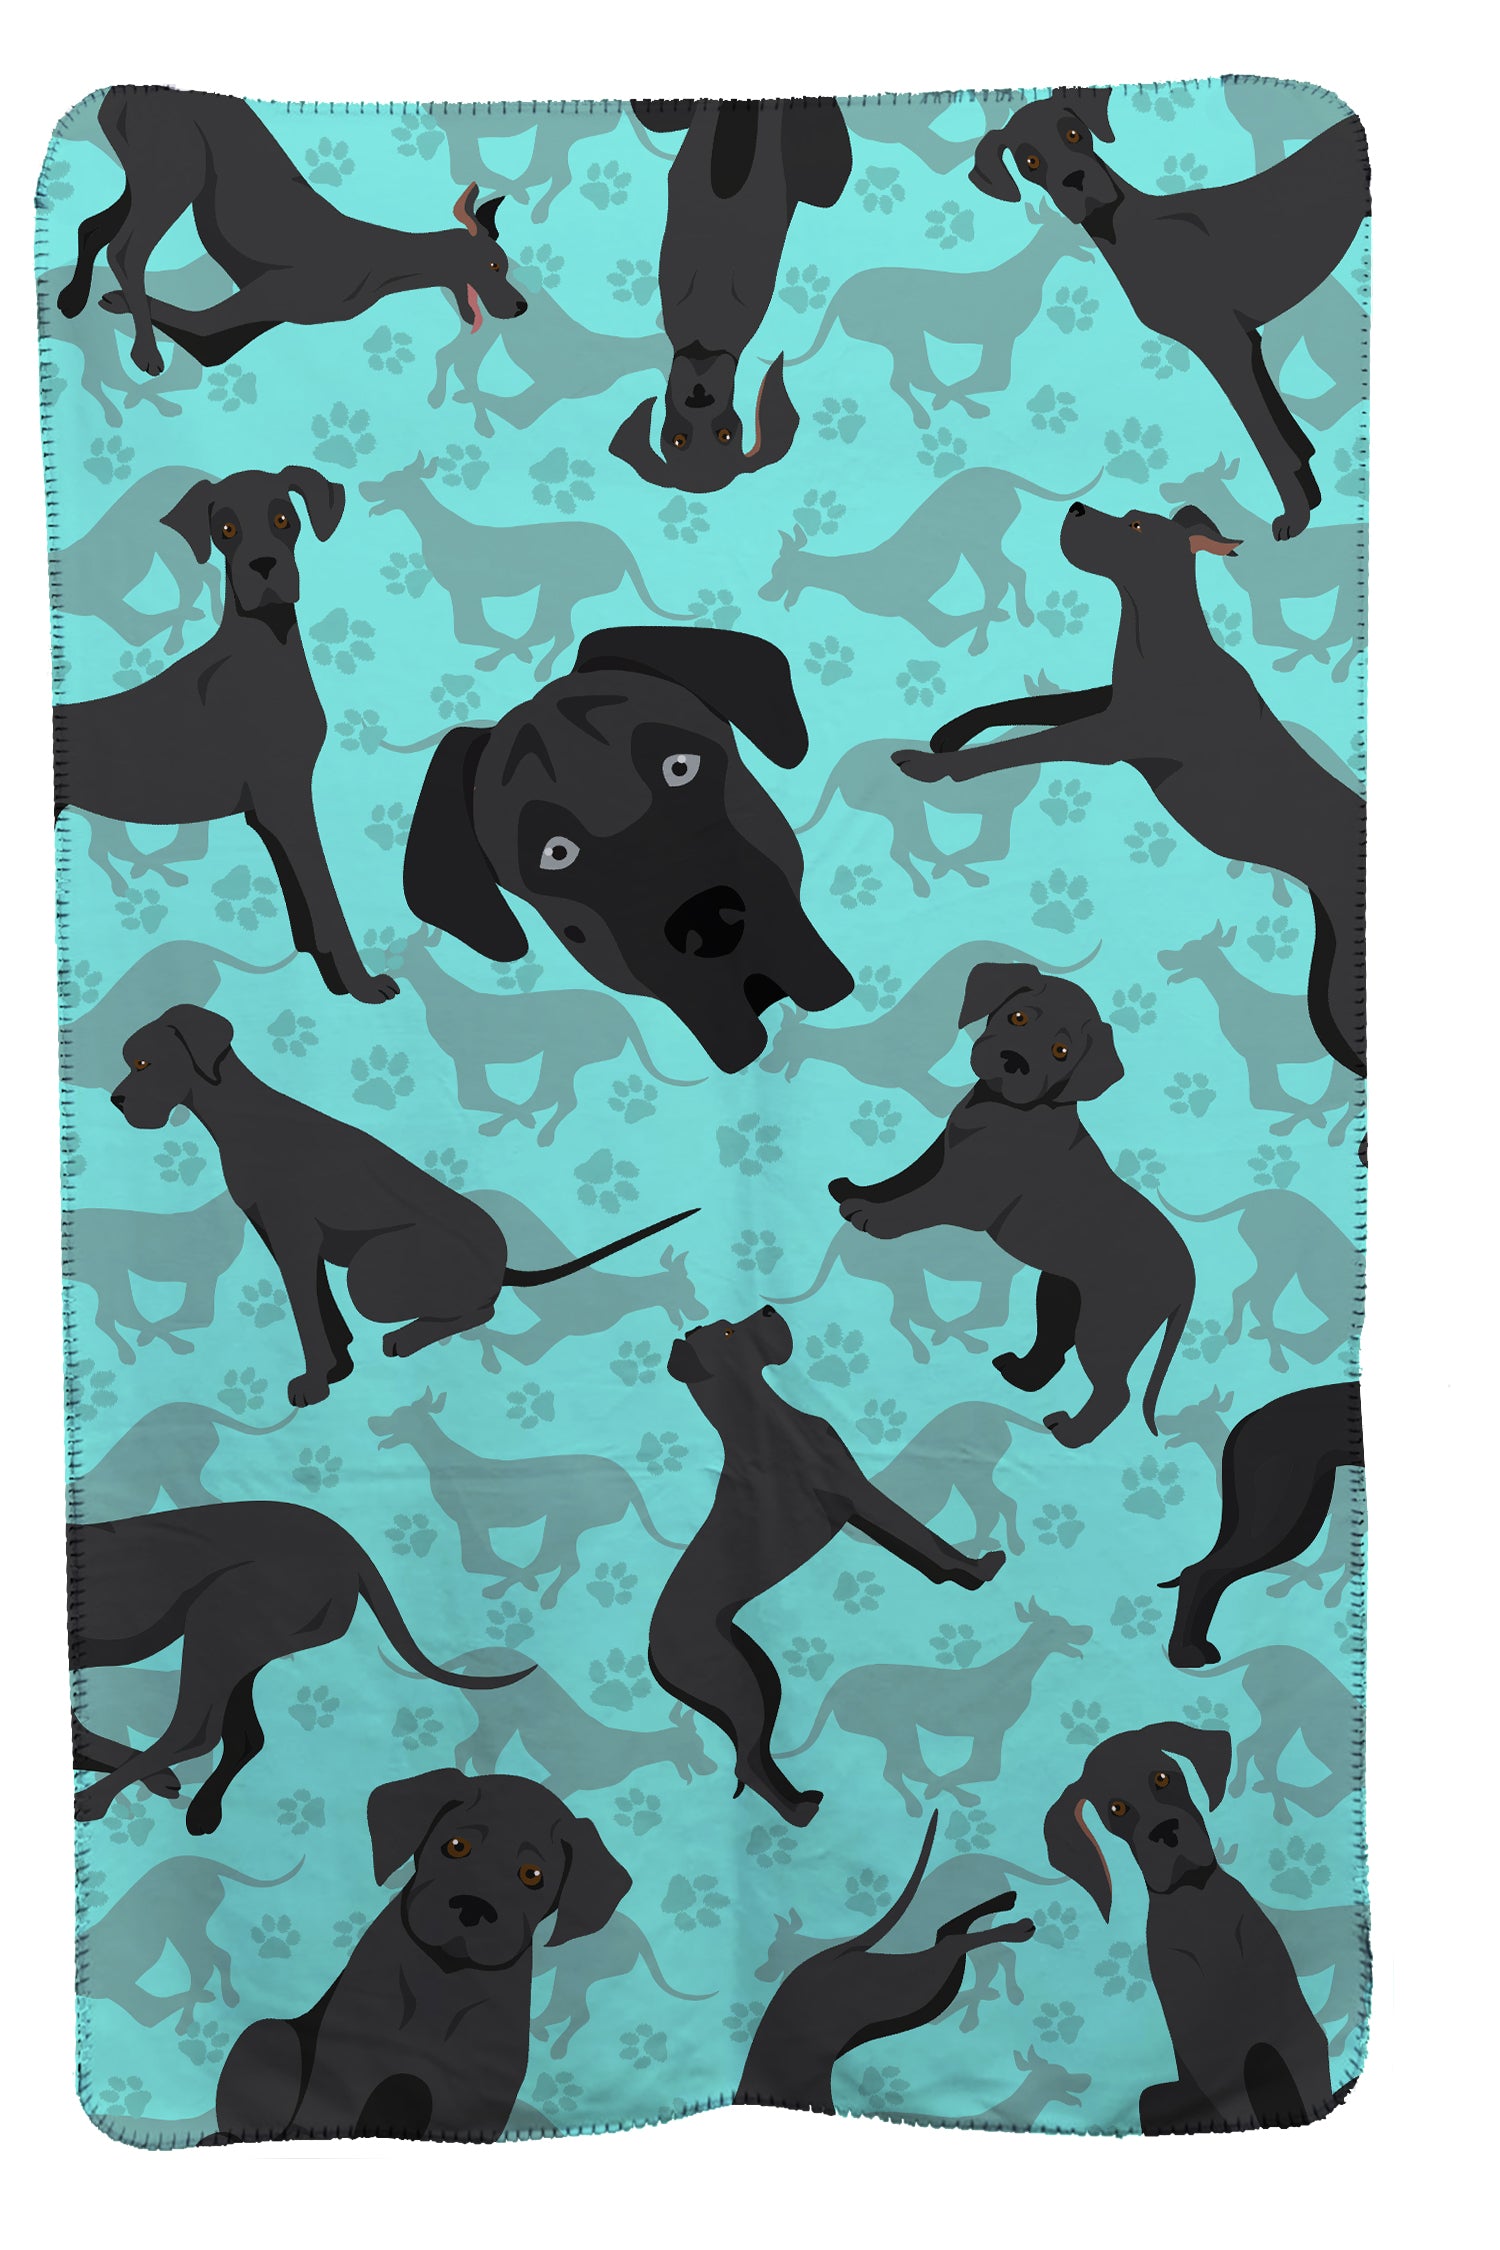 Buy this Black Great Dane Soft Travel Blanket with Bag